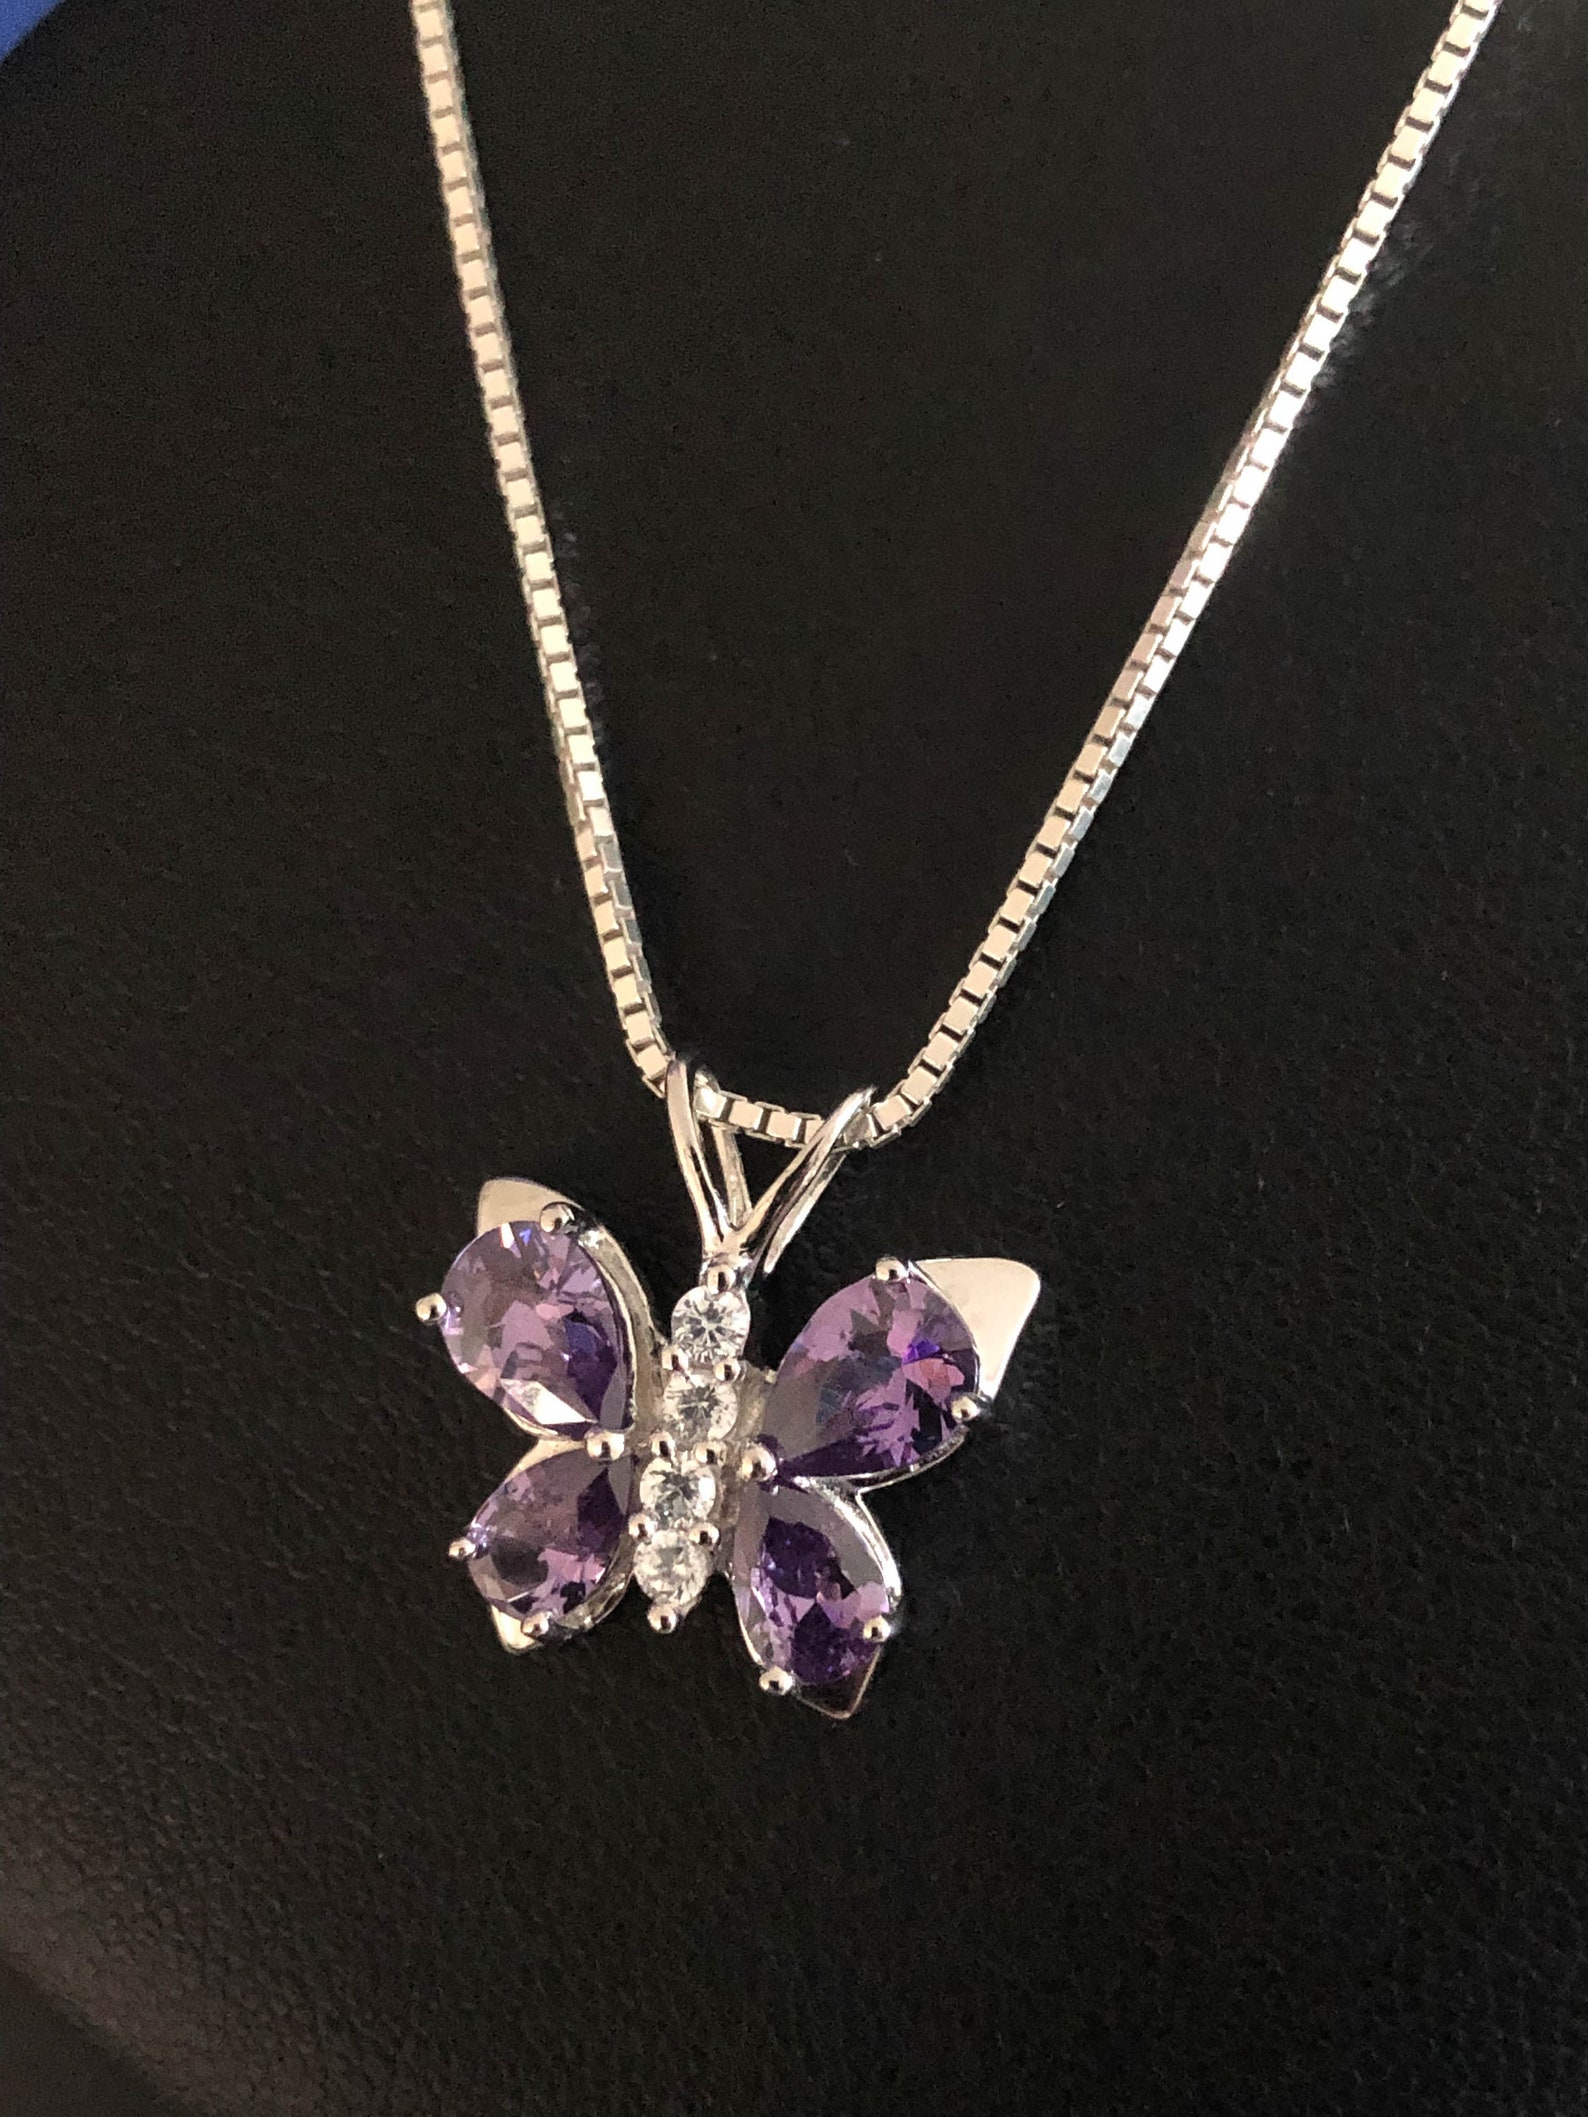 Amethyst Butterfly Necklace Sterling Silver Butterfly - Etsy